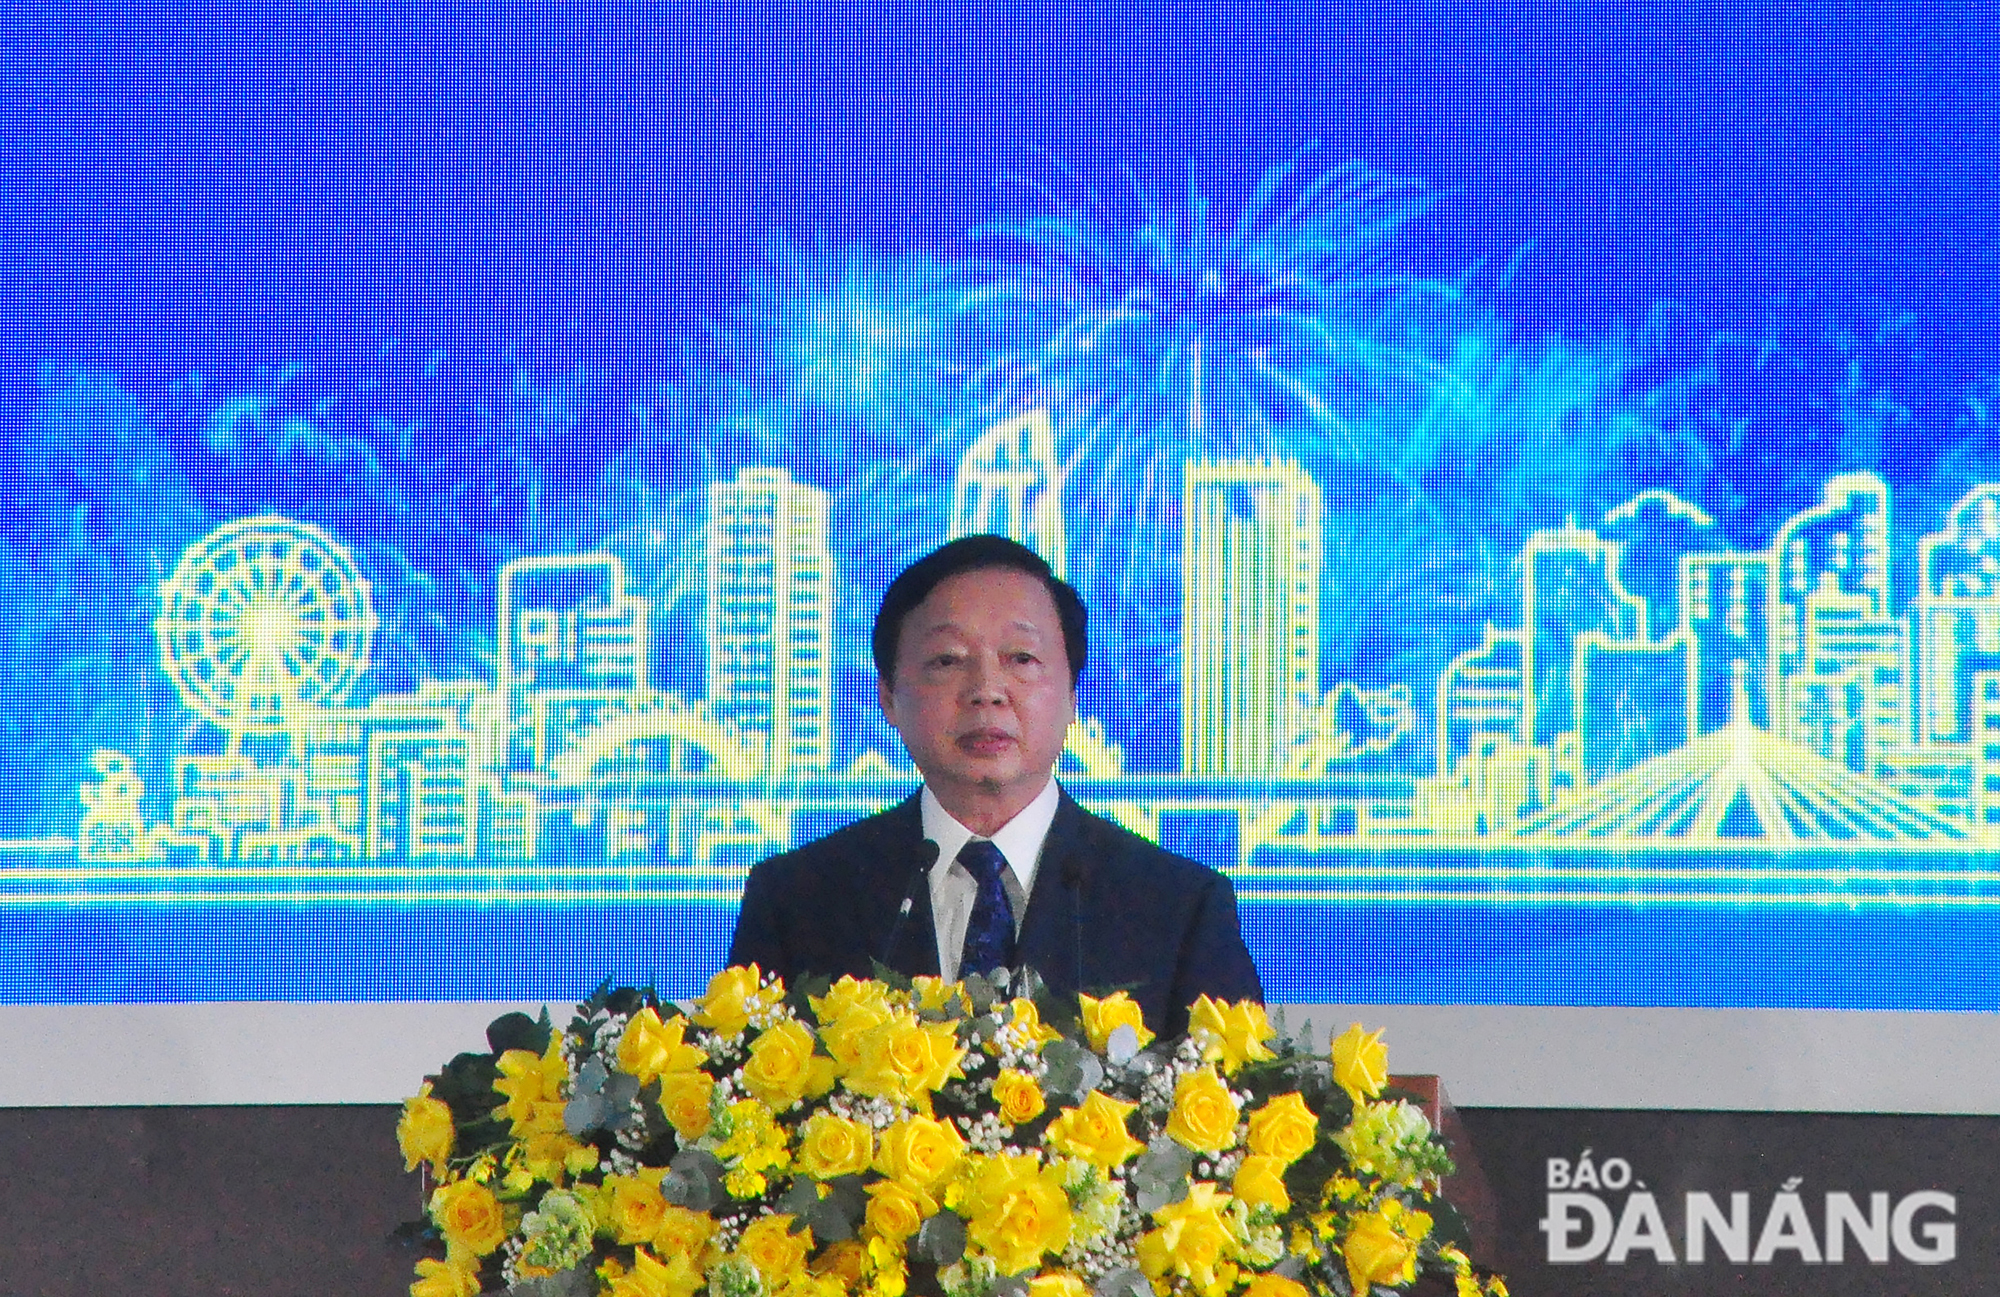 Deputy Prime Minister Tran Hong Ha spoke at the announcement ceremony of the Da Nang Master Plan for the 2021-2030 period, with a vision toward 2050. Photo: THANH LAN